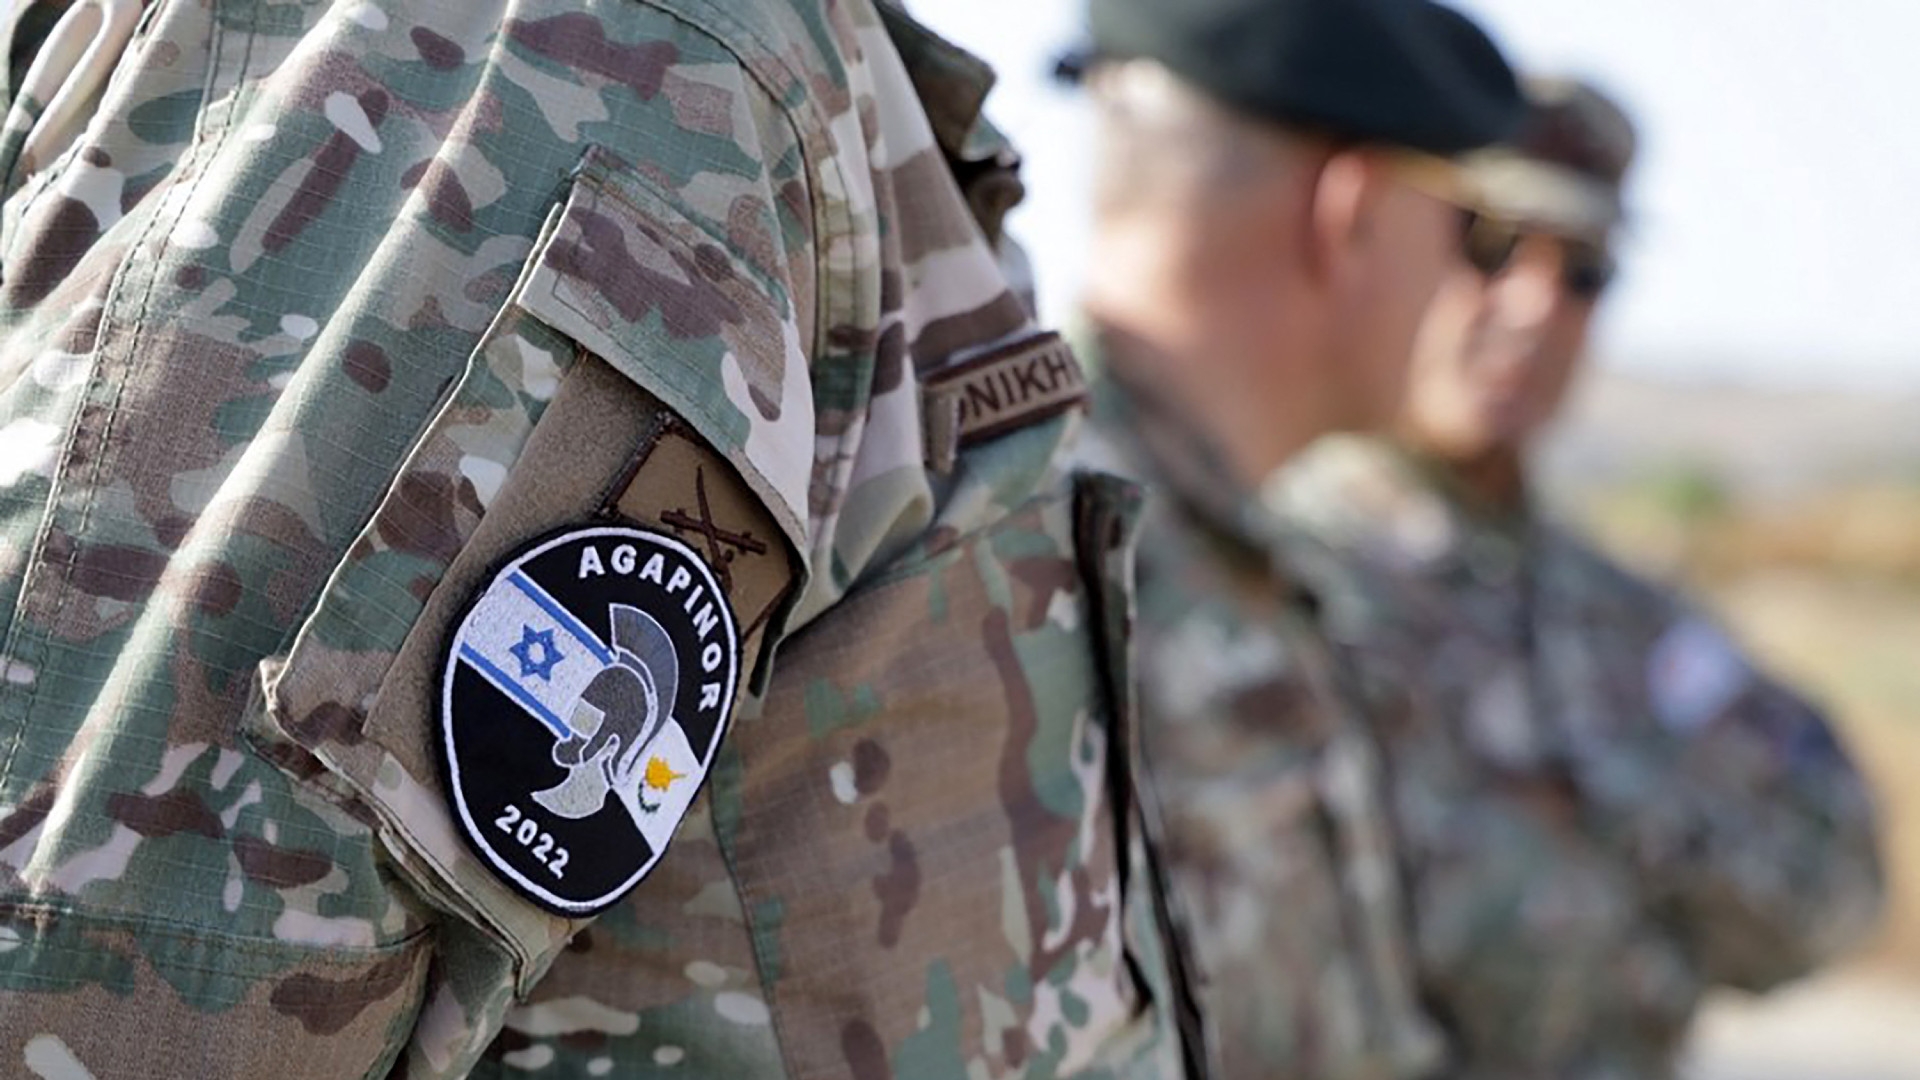 A Greek Cypriot national guardsman displays the emblem of the "Agapinor" joint military exercises with the Israeli military during drills in Cyprus on 2 June 2022 (Greek Cypriot National Guard/AFP)